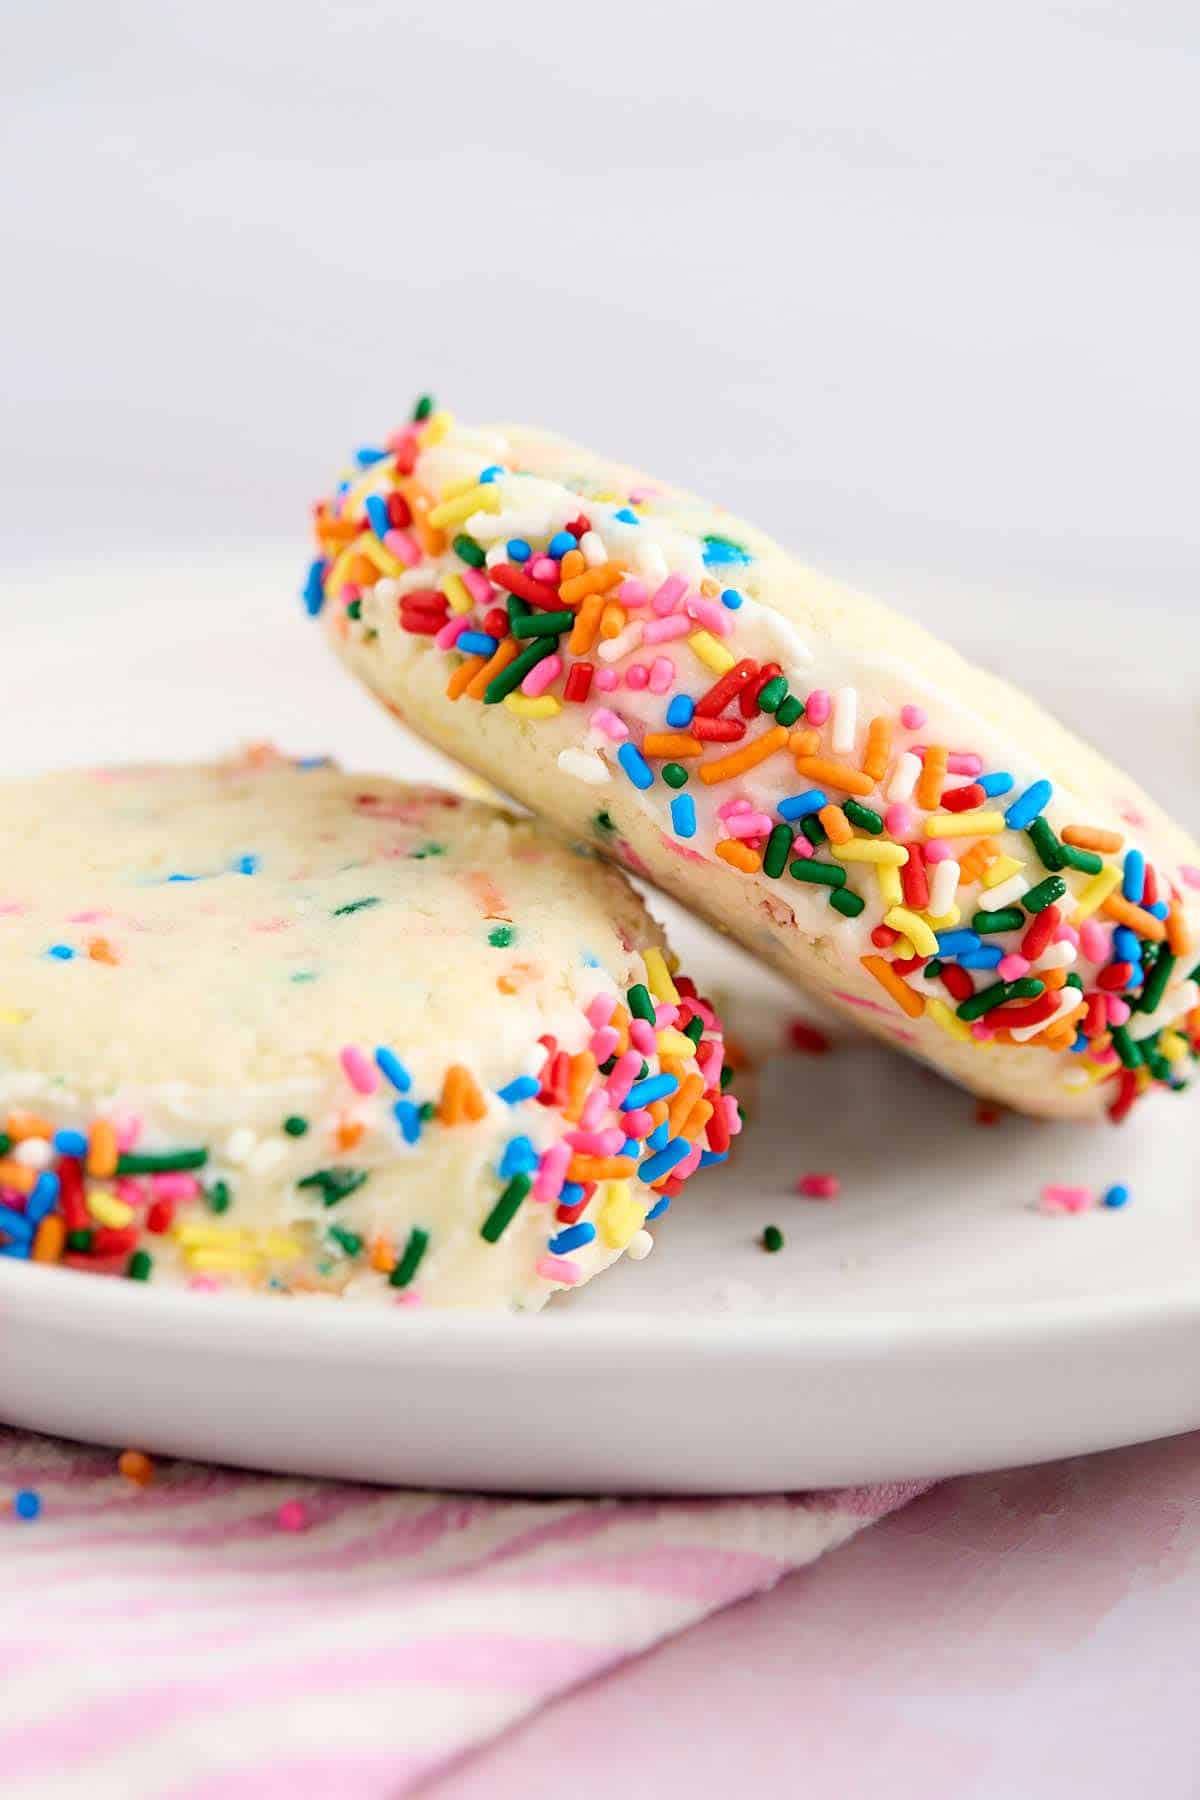 Two Funfetti cake mix cookie sandwiches on a dessert plate.